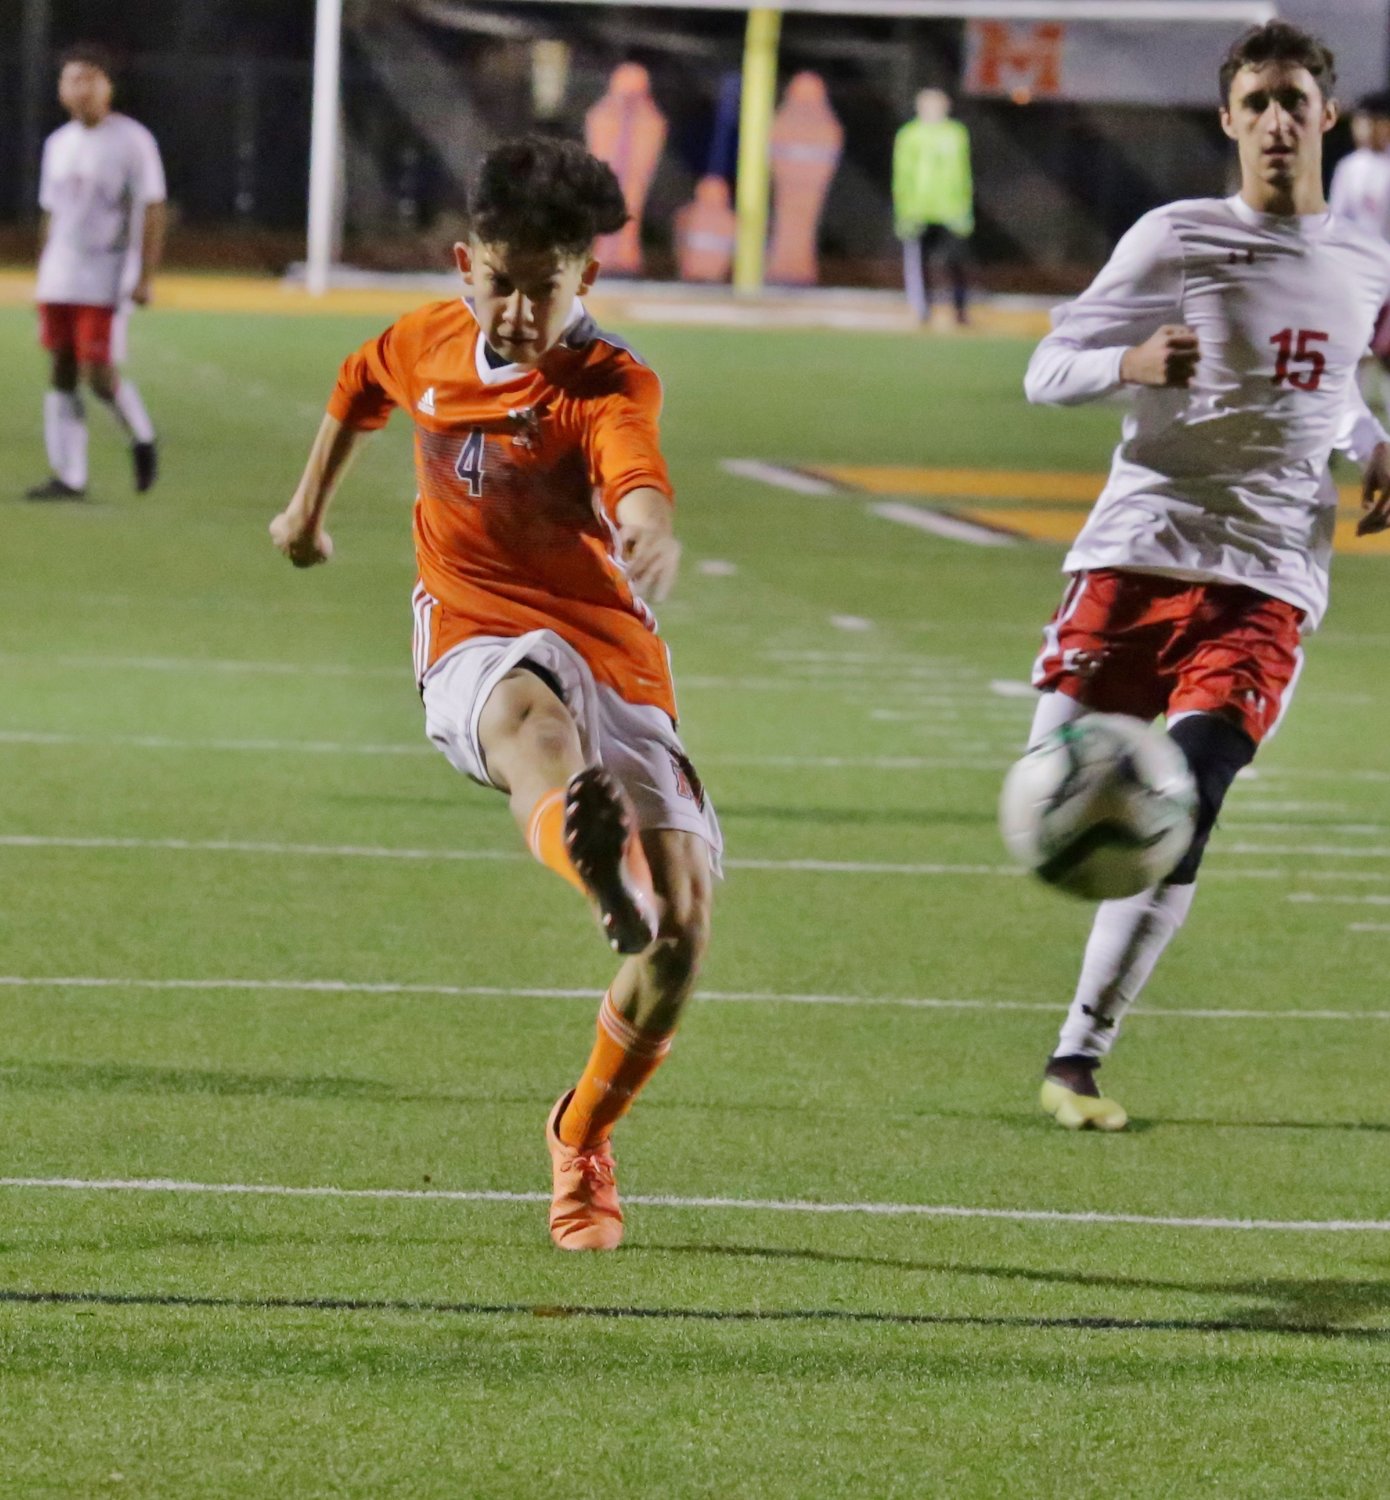 Omar Galaz fires a shot at goal in Mineola’s 5-1 win Friday against Van.